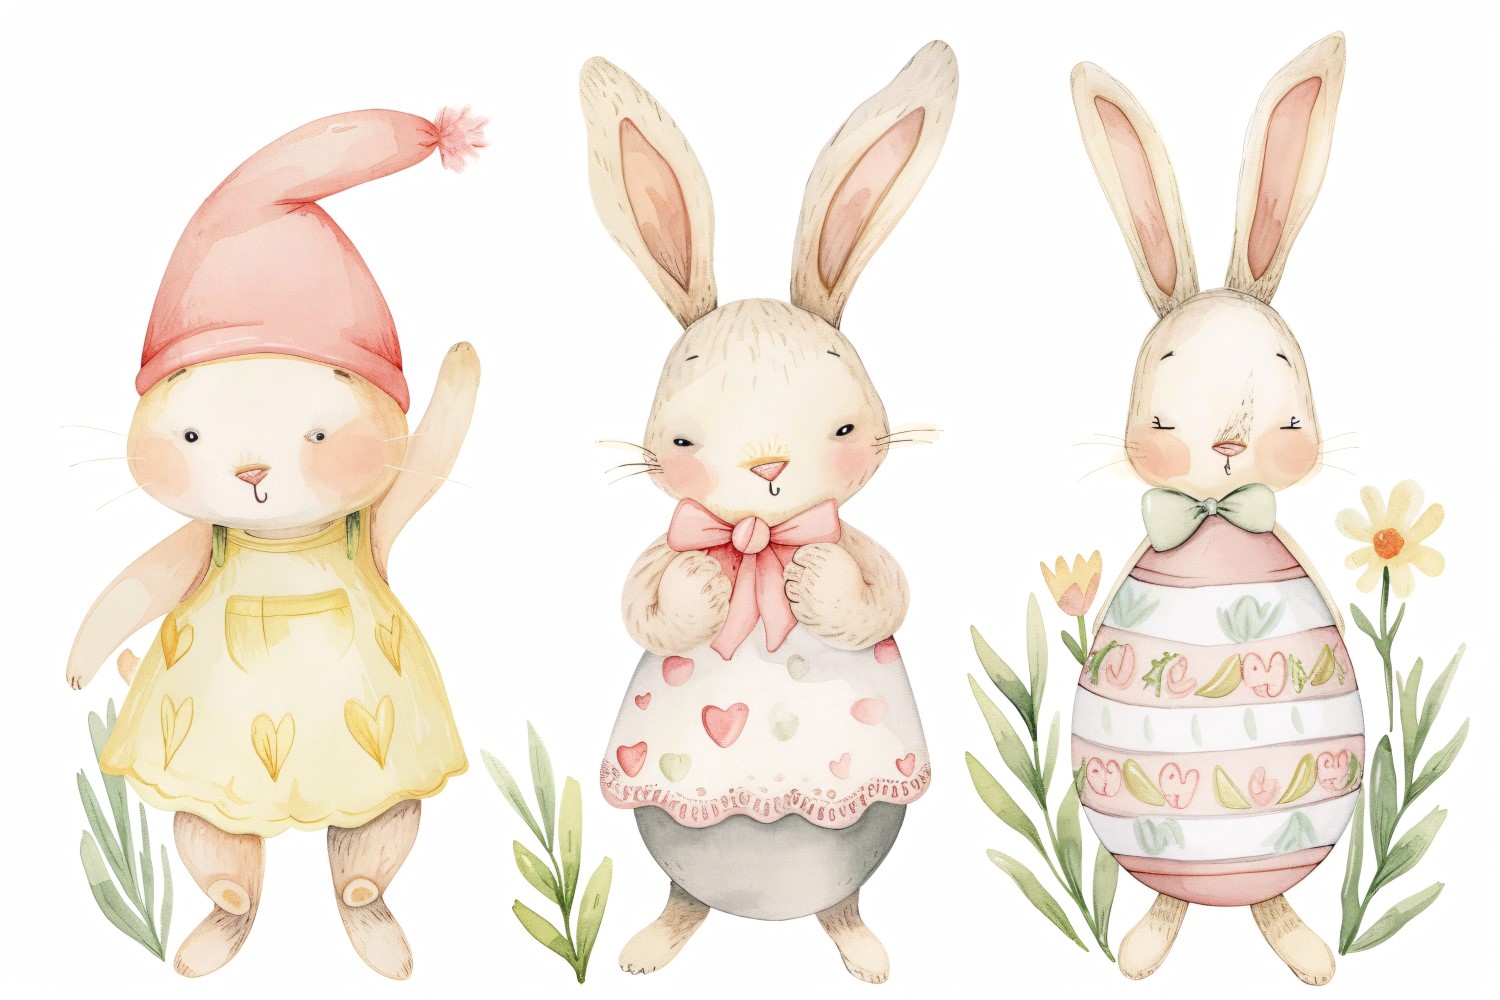 Hand Drawn Watercolour Style Happy Easter Bunny 148